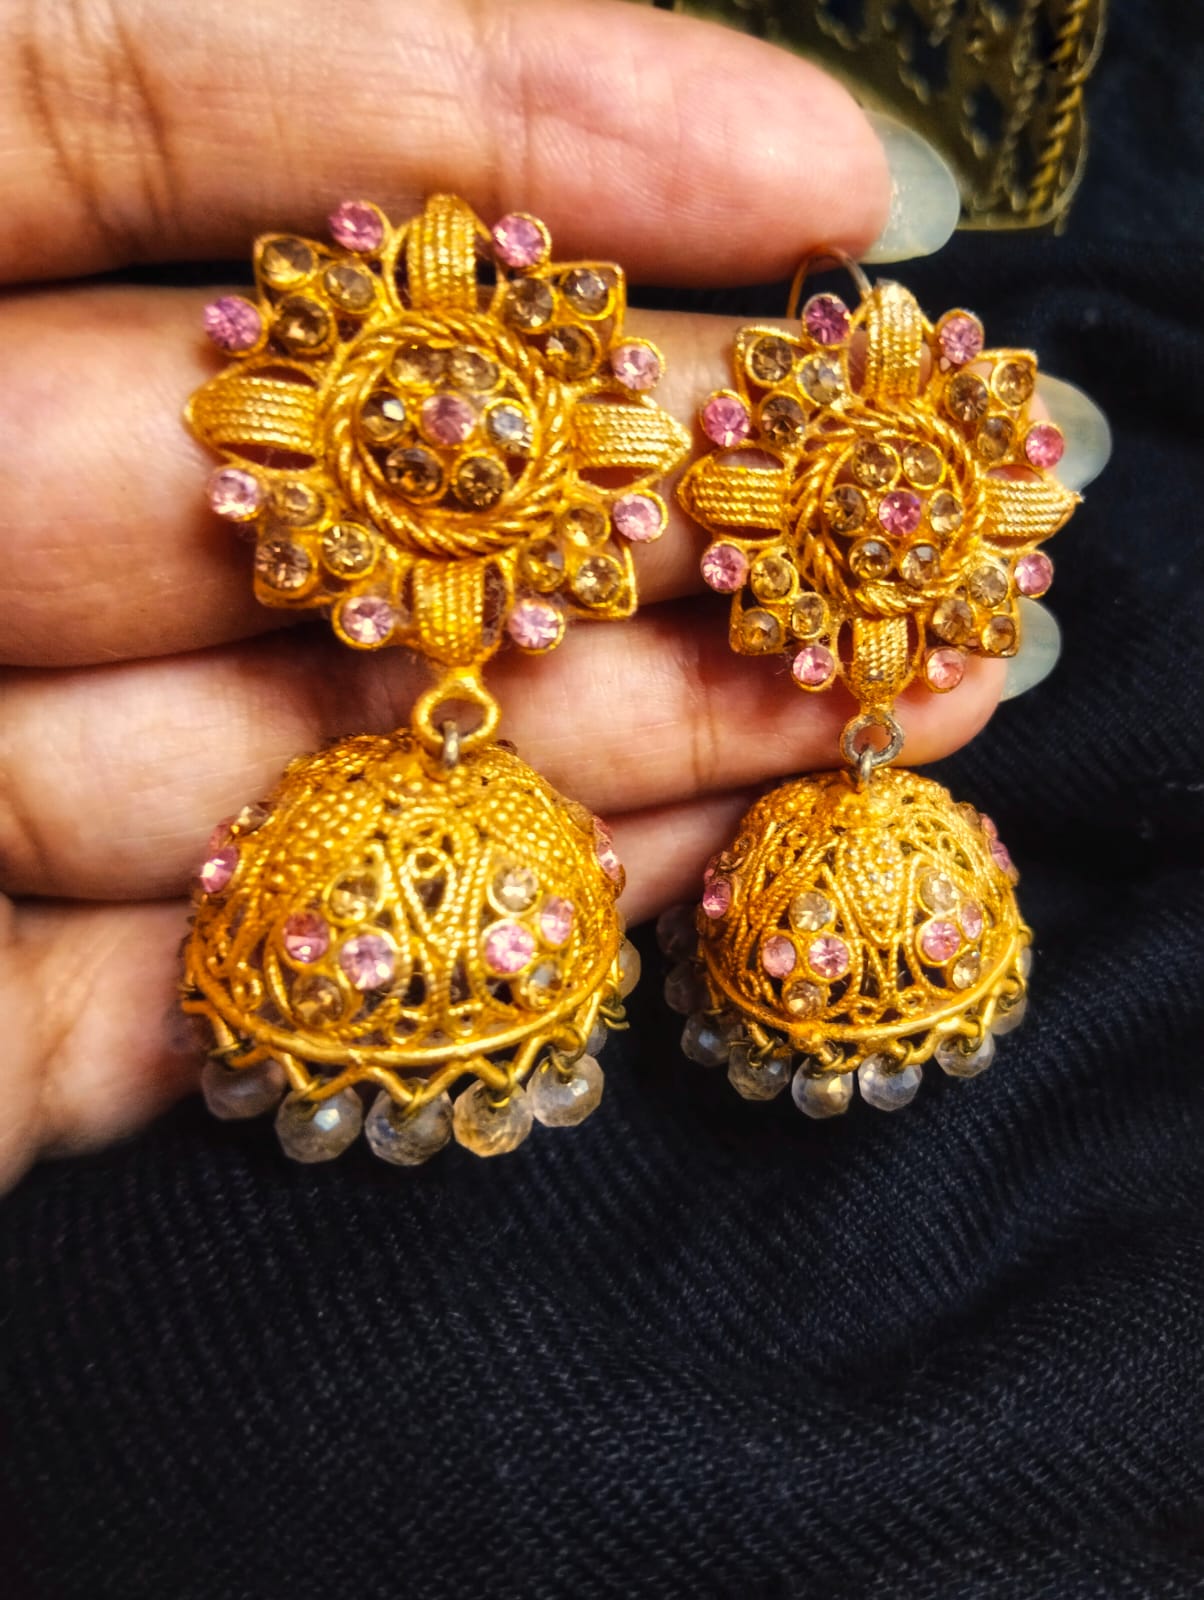 Handcrafted Pakistani earrings in the style of Manjoos: desi chic jhumkis, resembling the richness of gold, adorned with an array of colored stones and beads. A fusion of tradition and modern aesthetics, perfect for adding elegance to any occasion.